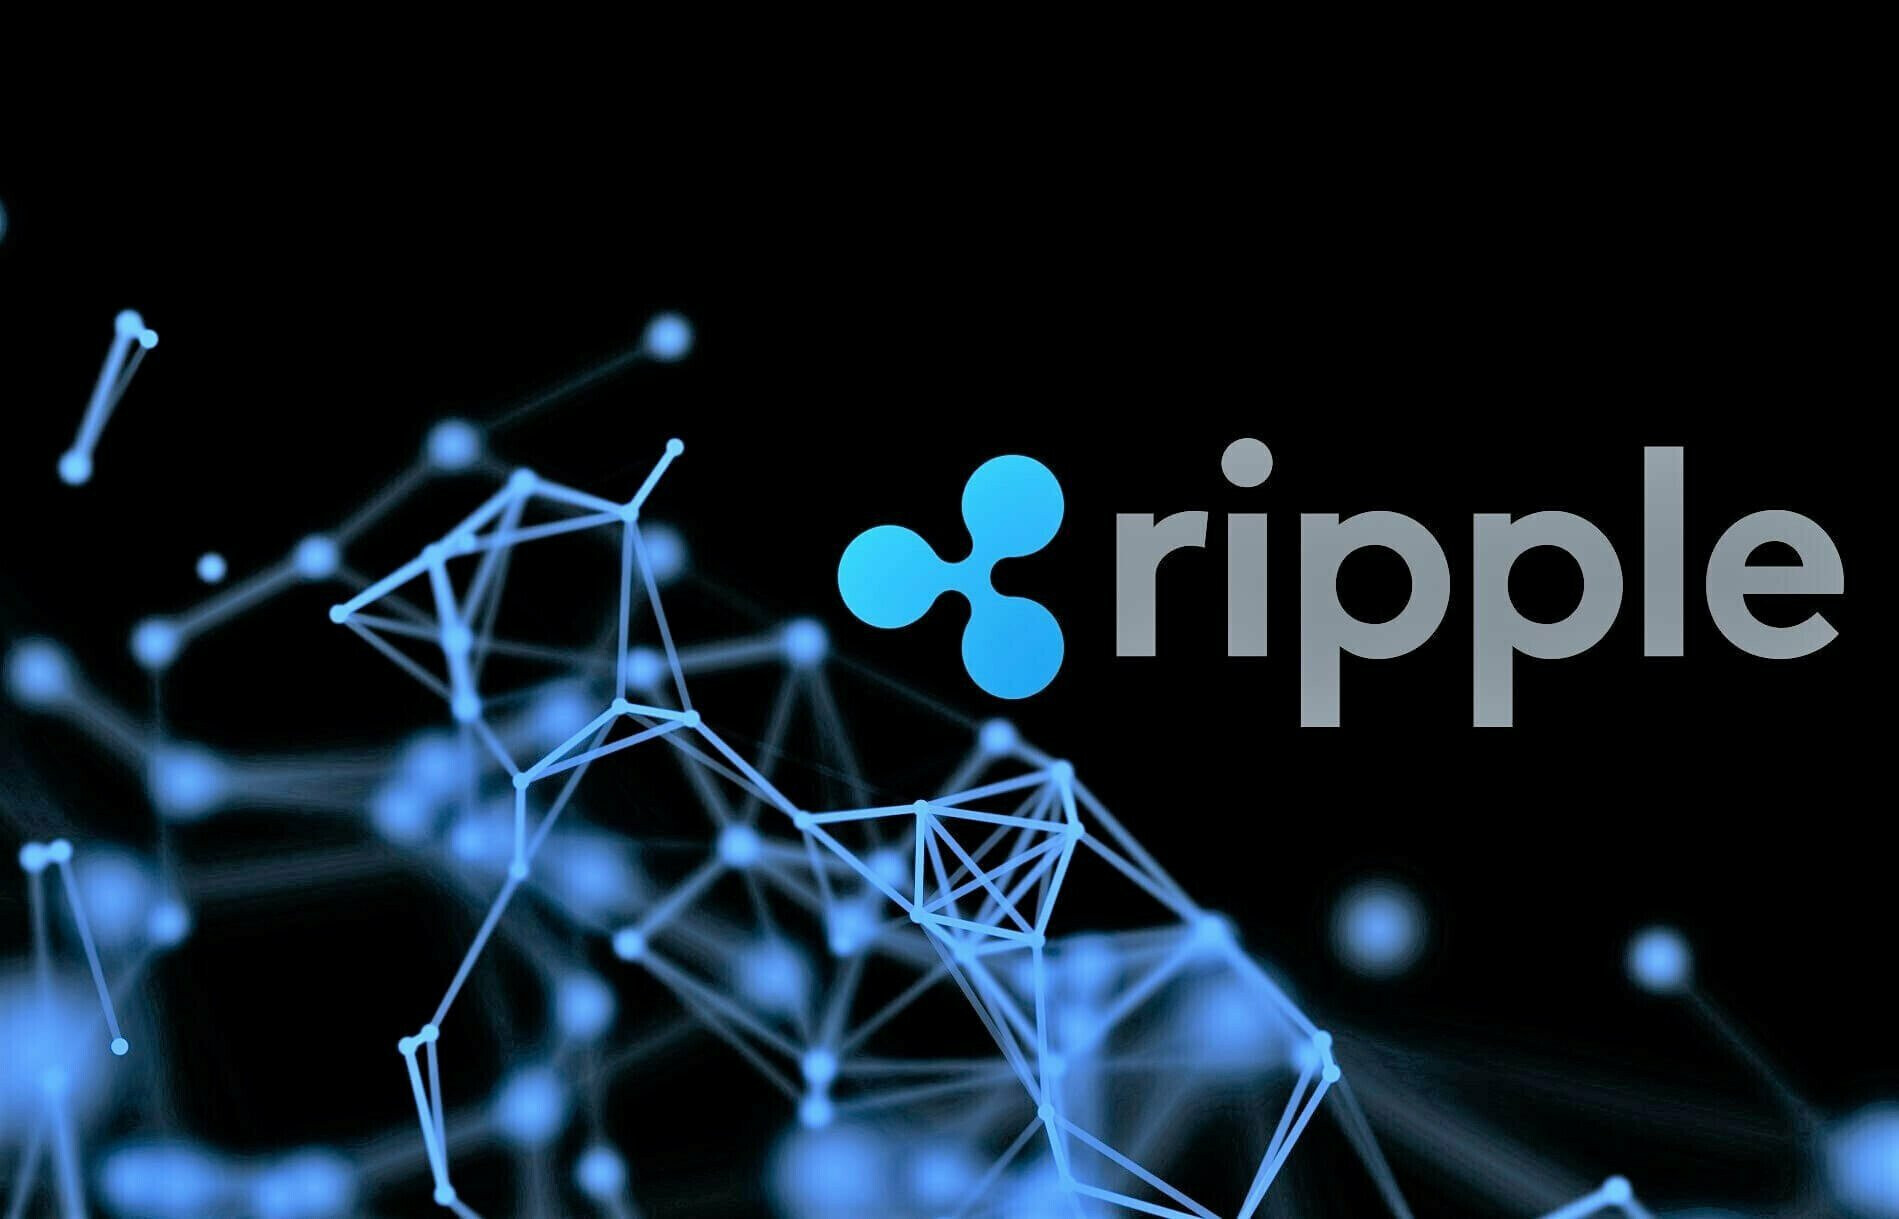 ripple logo media library Instantly Interpret Free: Legalese Decoder - AI Lawyer Translate Legal docs to plain English